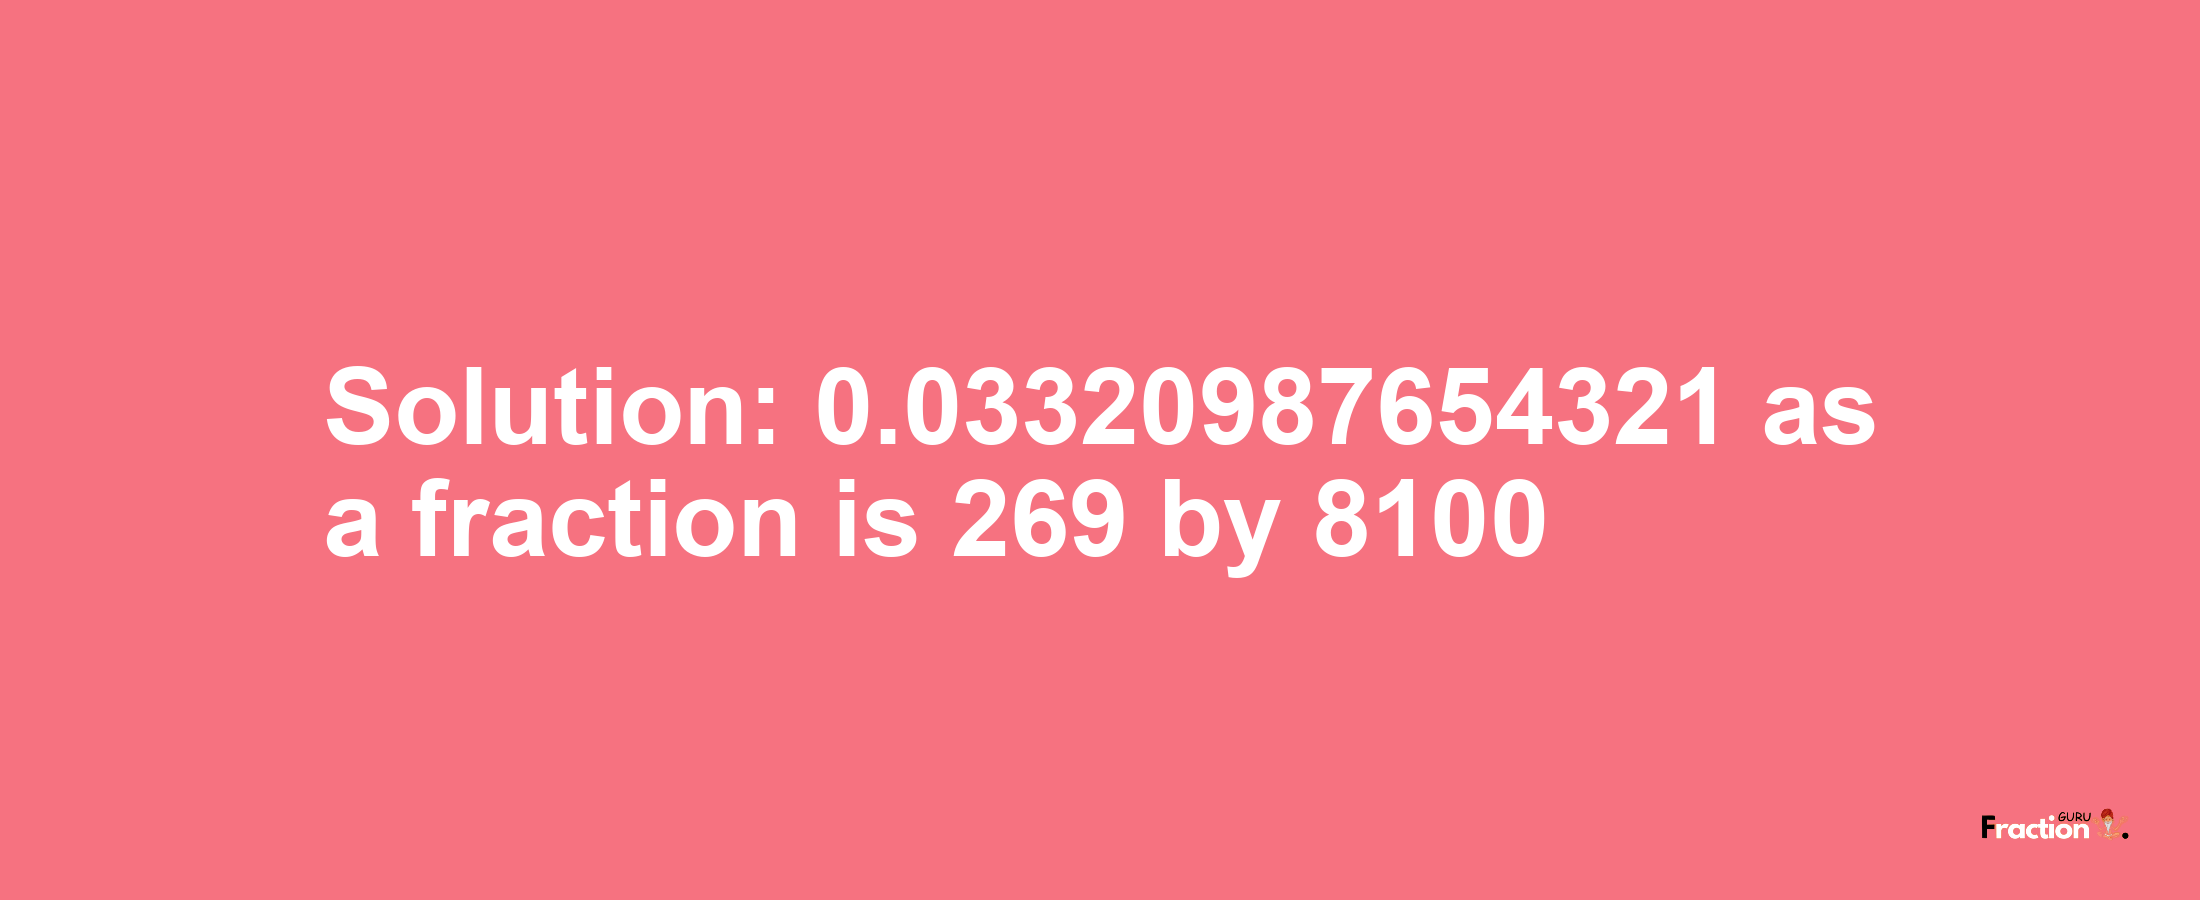 Solution:0.03320987654321 as a fraction is 269/8100